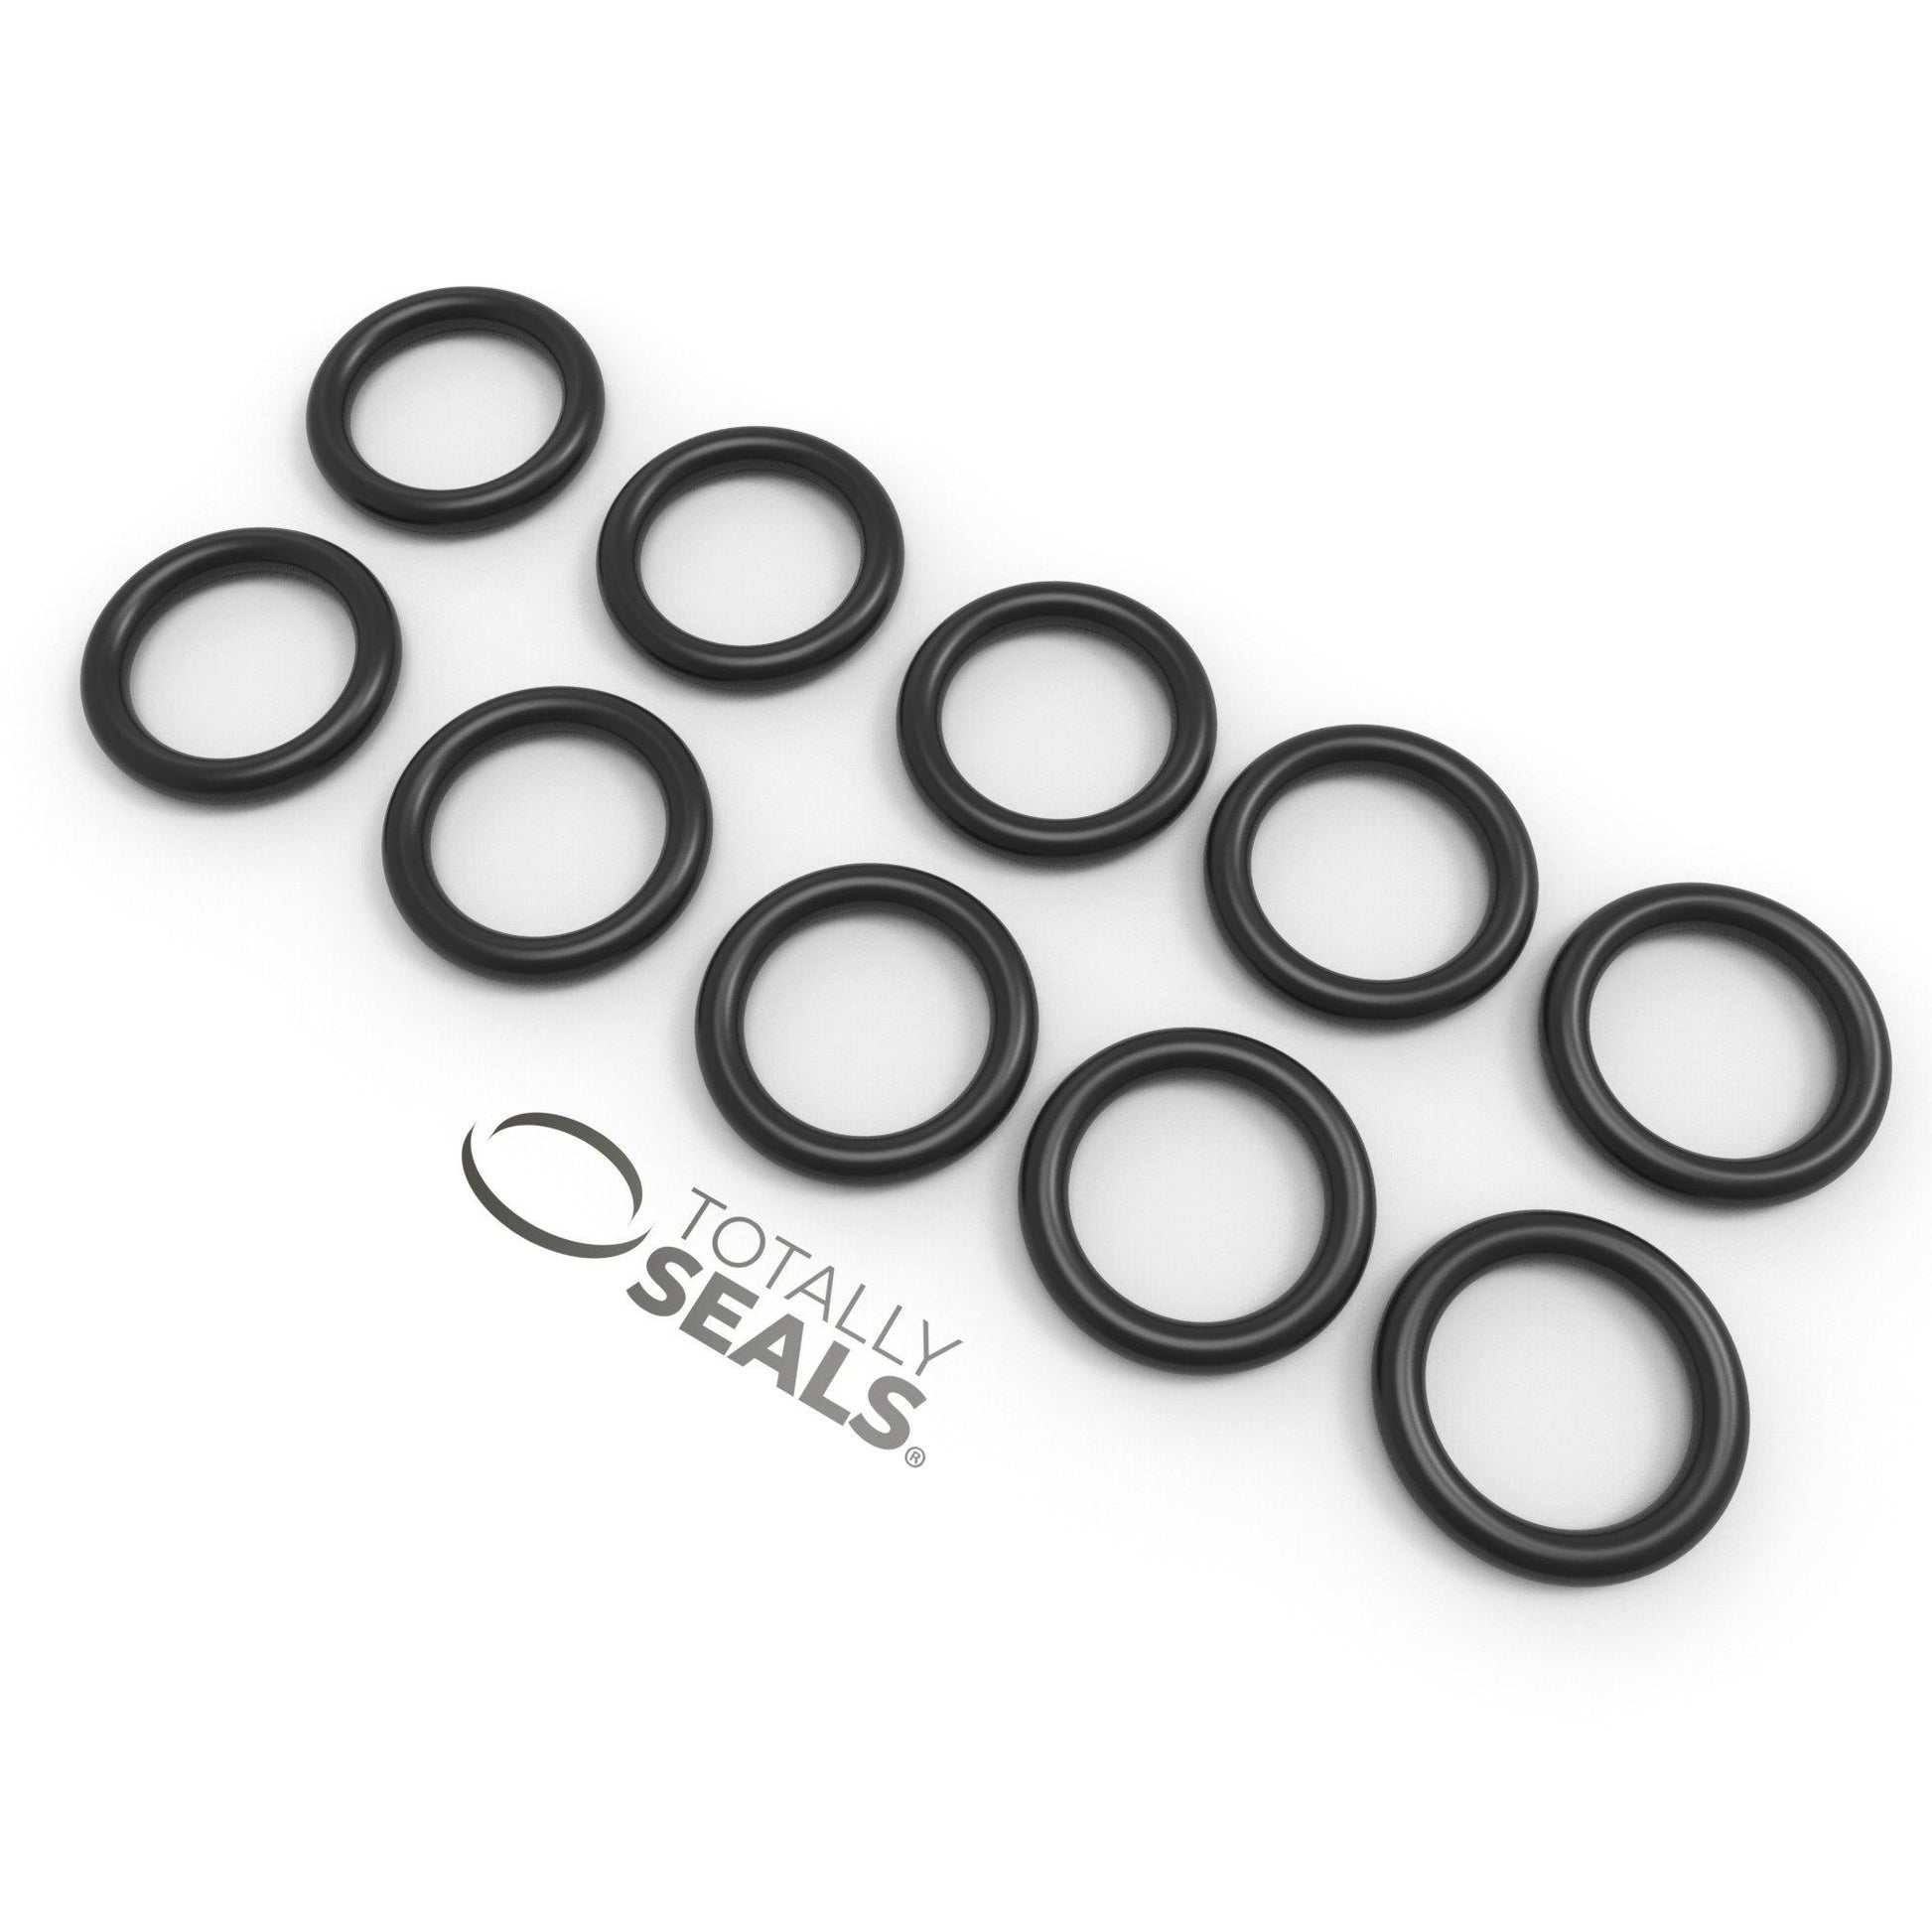 11mm x 1.5mm (14mm OD) Nitrile O-Rings - Totally Seals®